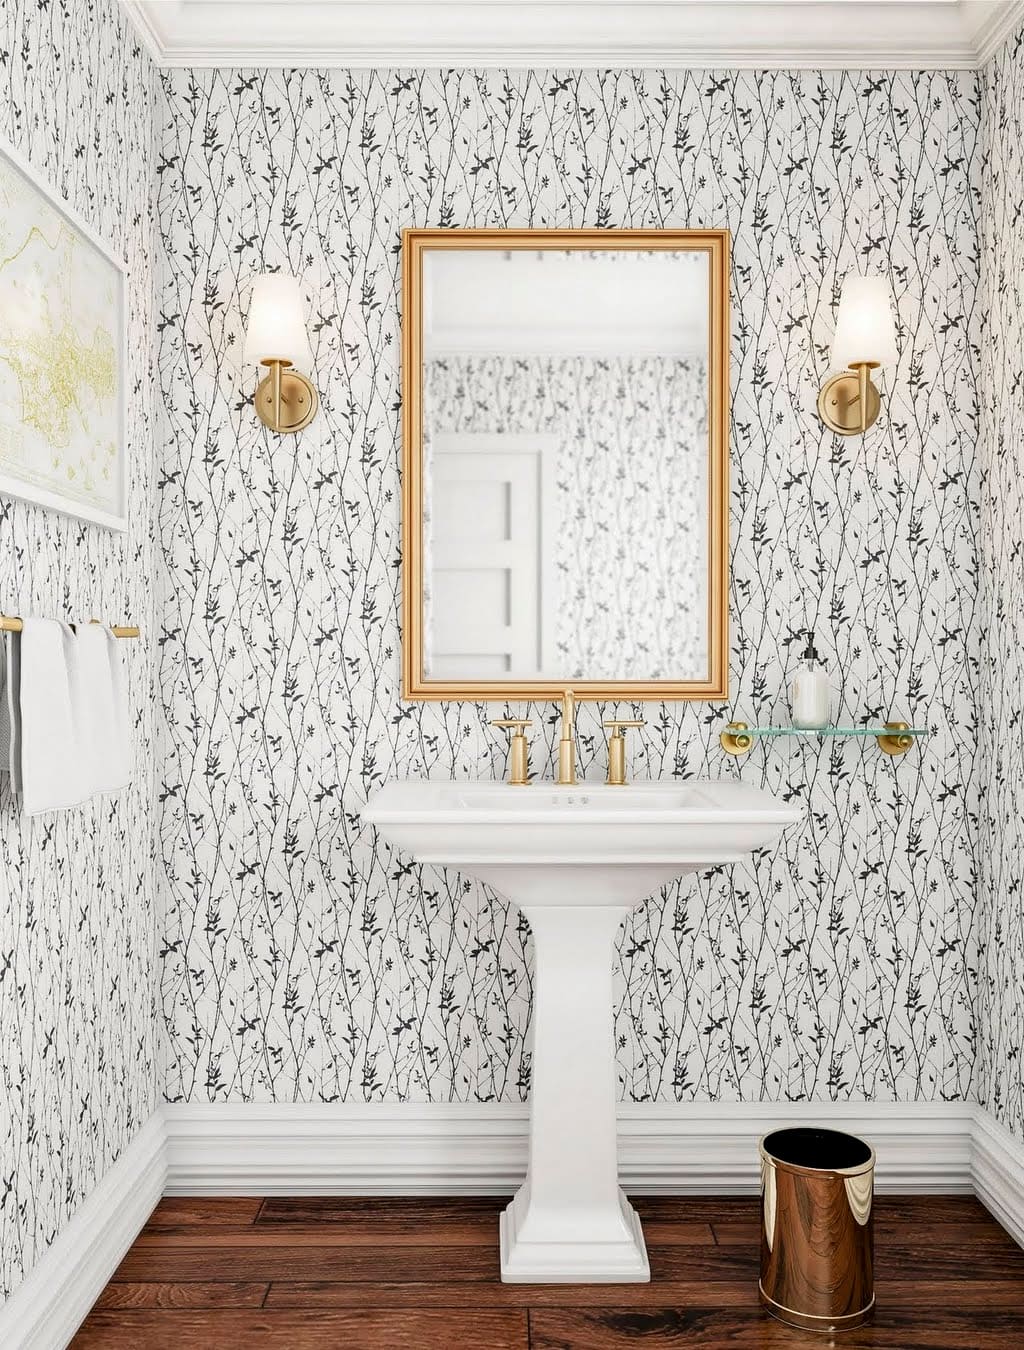 Powder Room Bathroom with Gold Accents